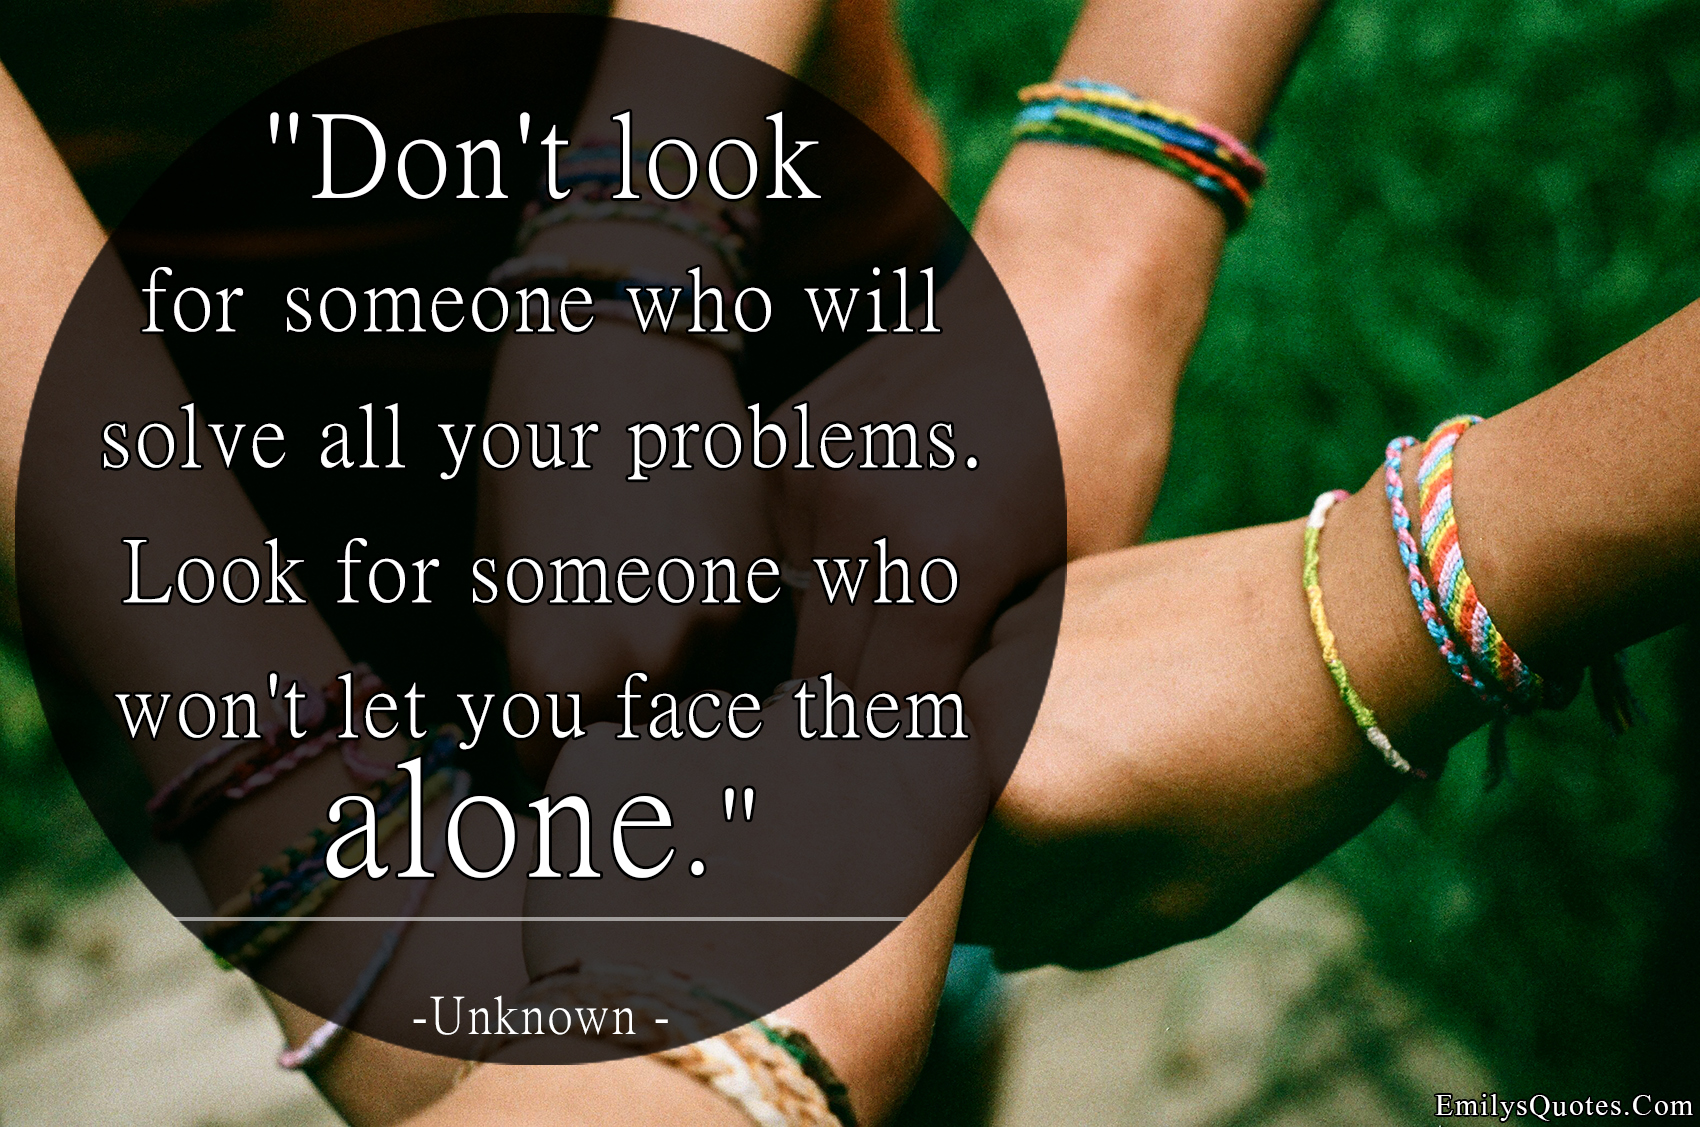 Don’t look for someone who will solve all your problems. Look for someone who won’t let you face them alone